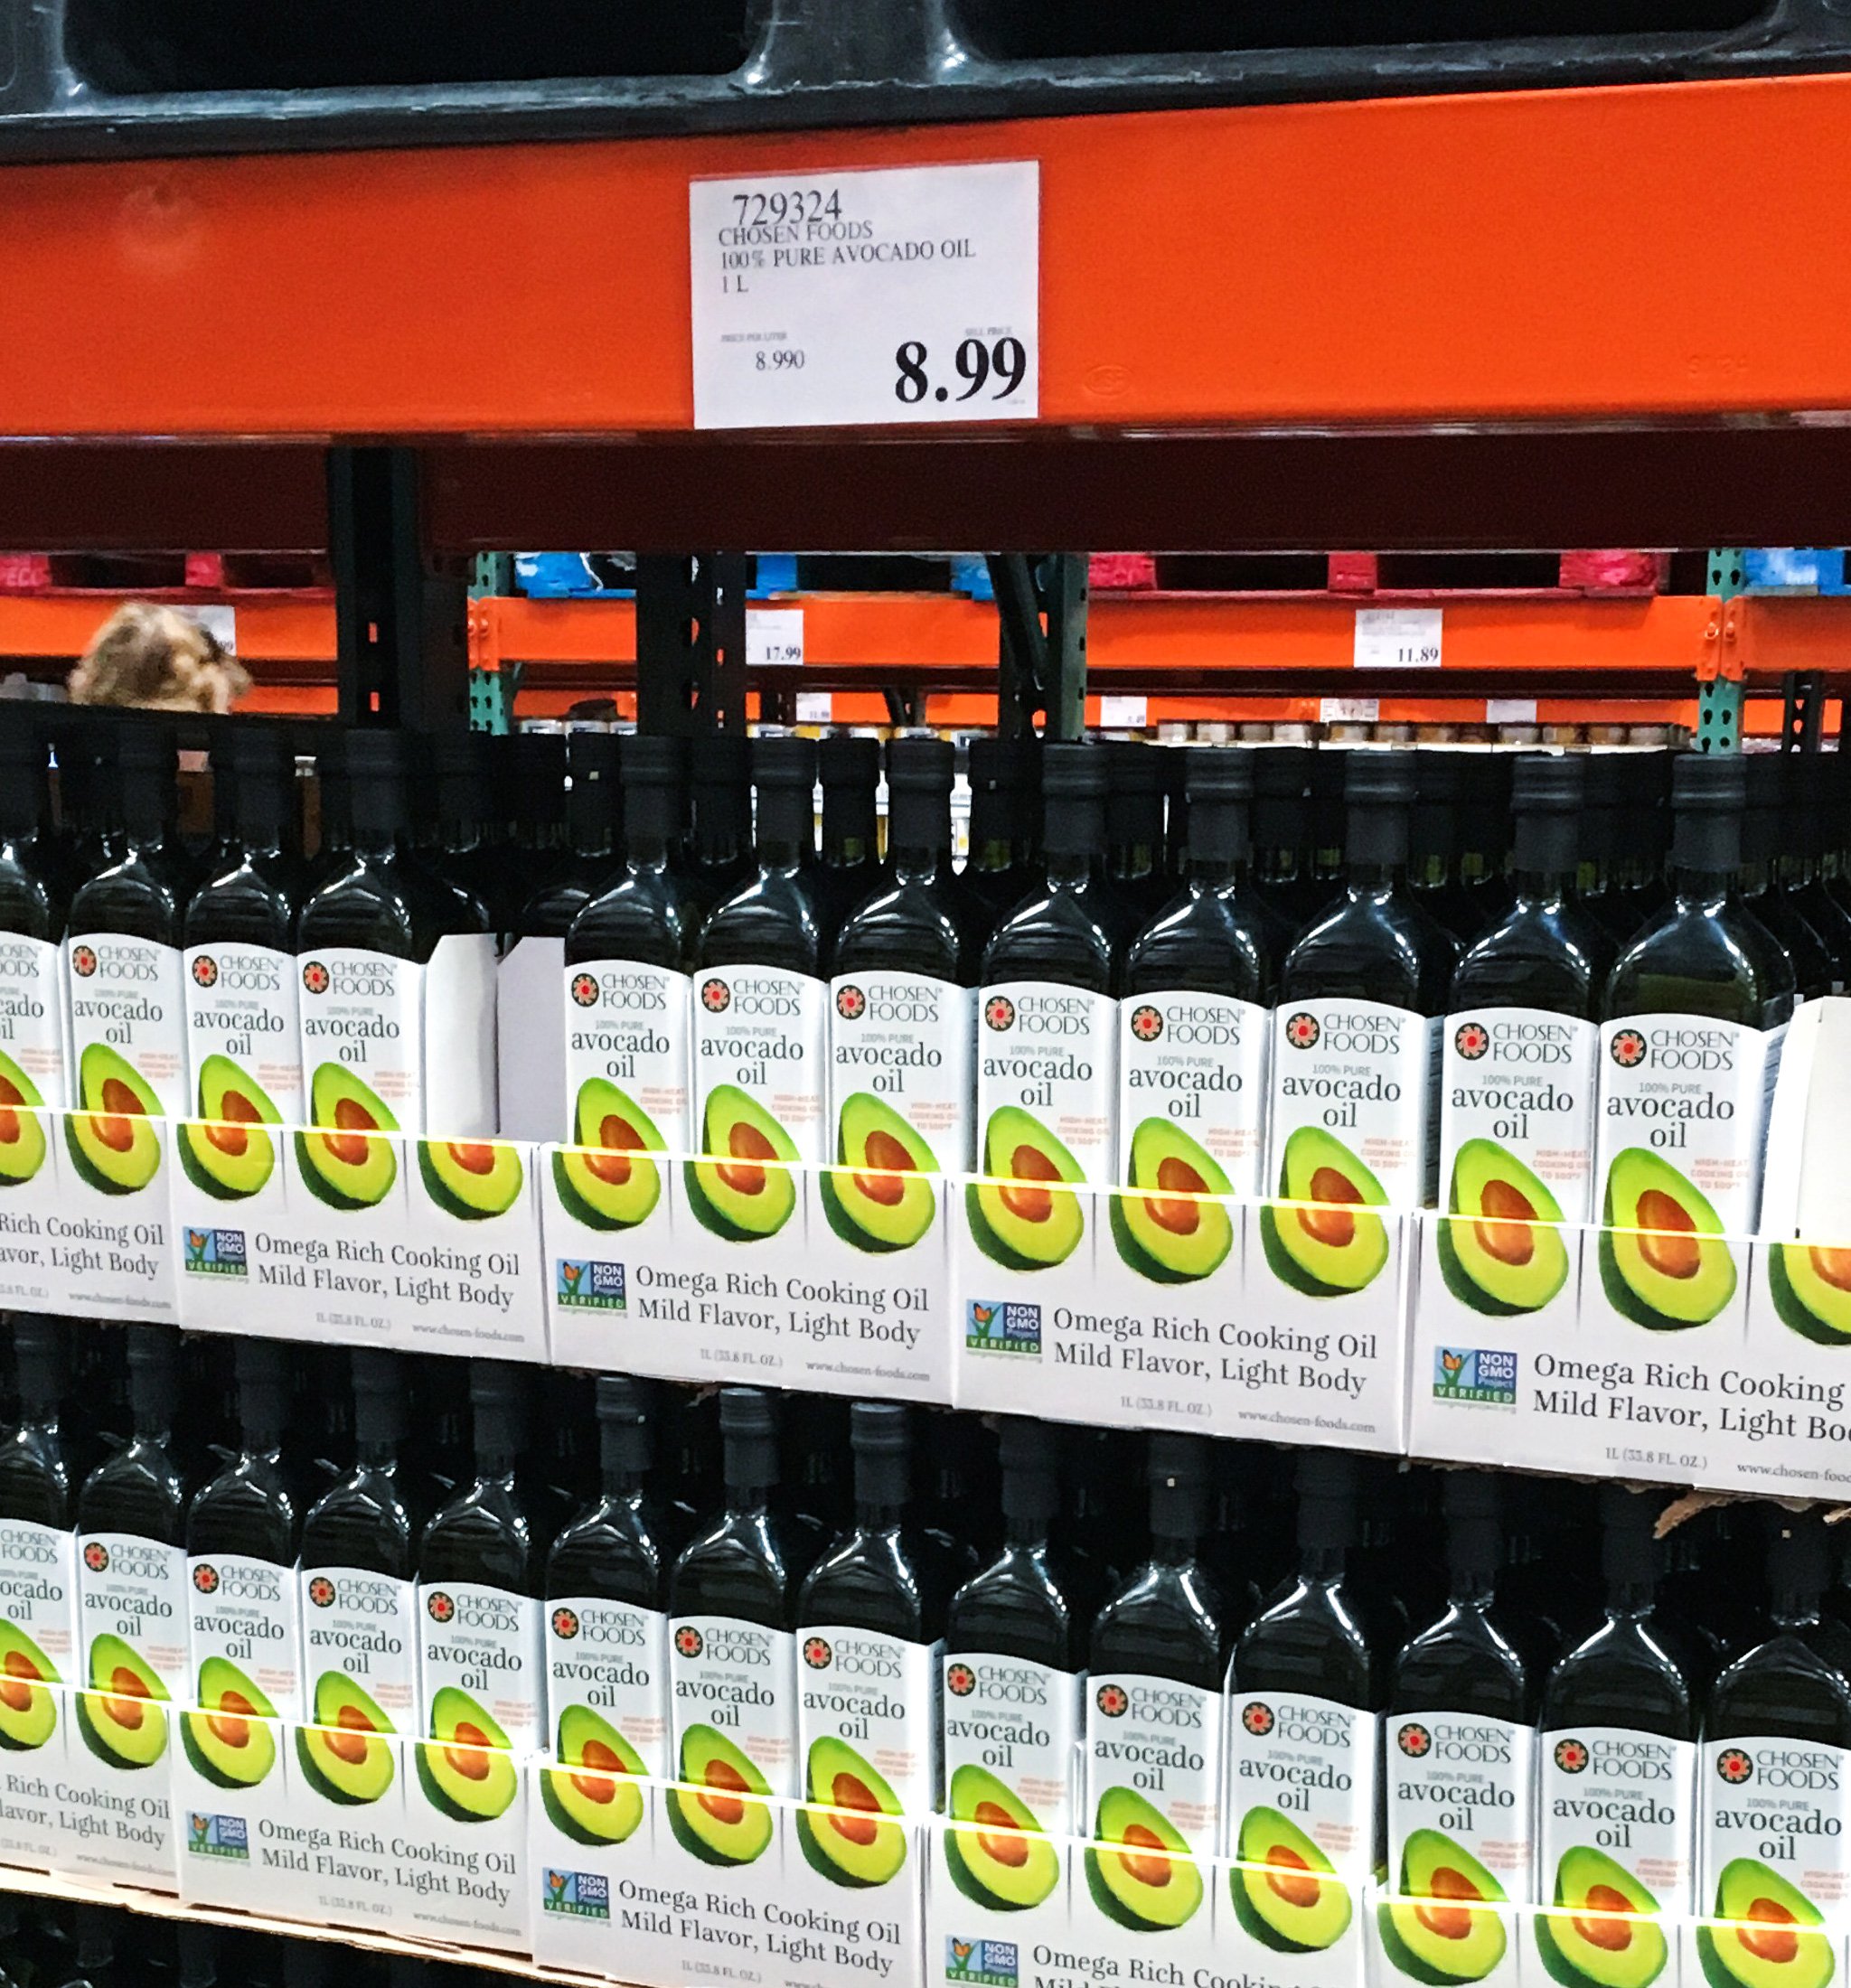 Boxes of bottles of avocado oil for sale at Costco - buying in bulk is one of the 12 Tips to Help You Master Your Weekly Meal Prep Routine